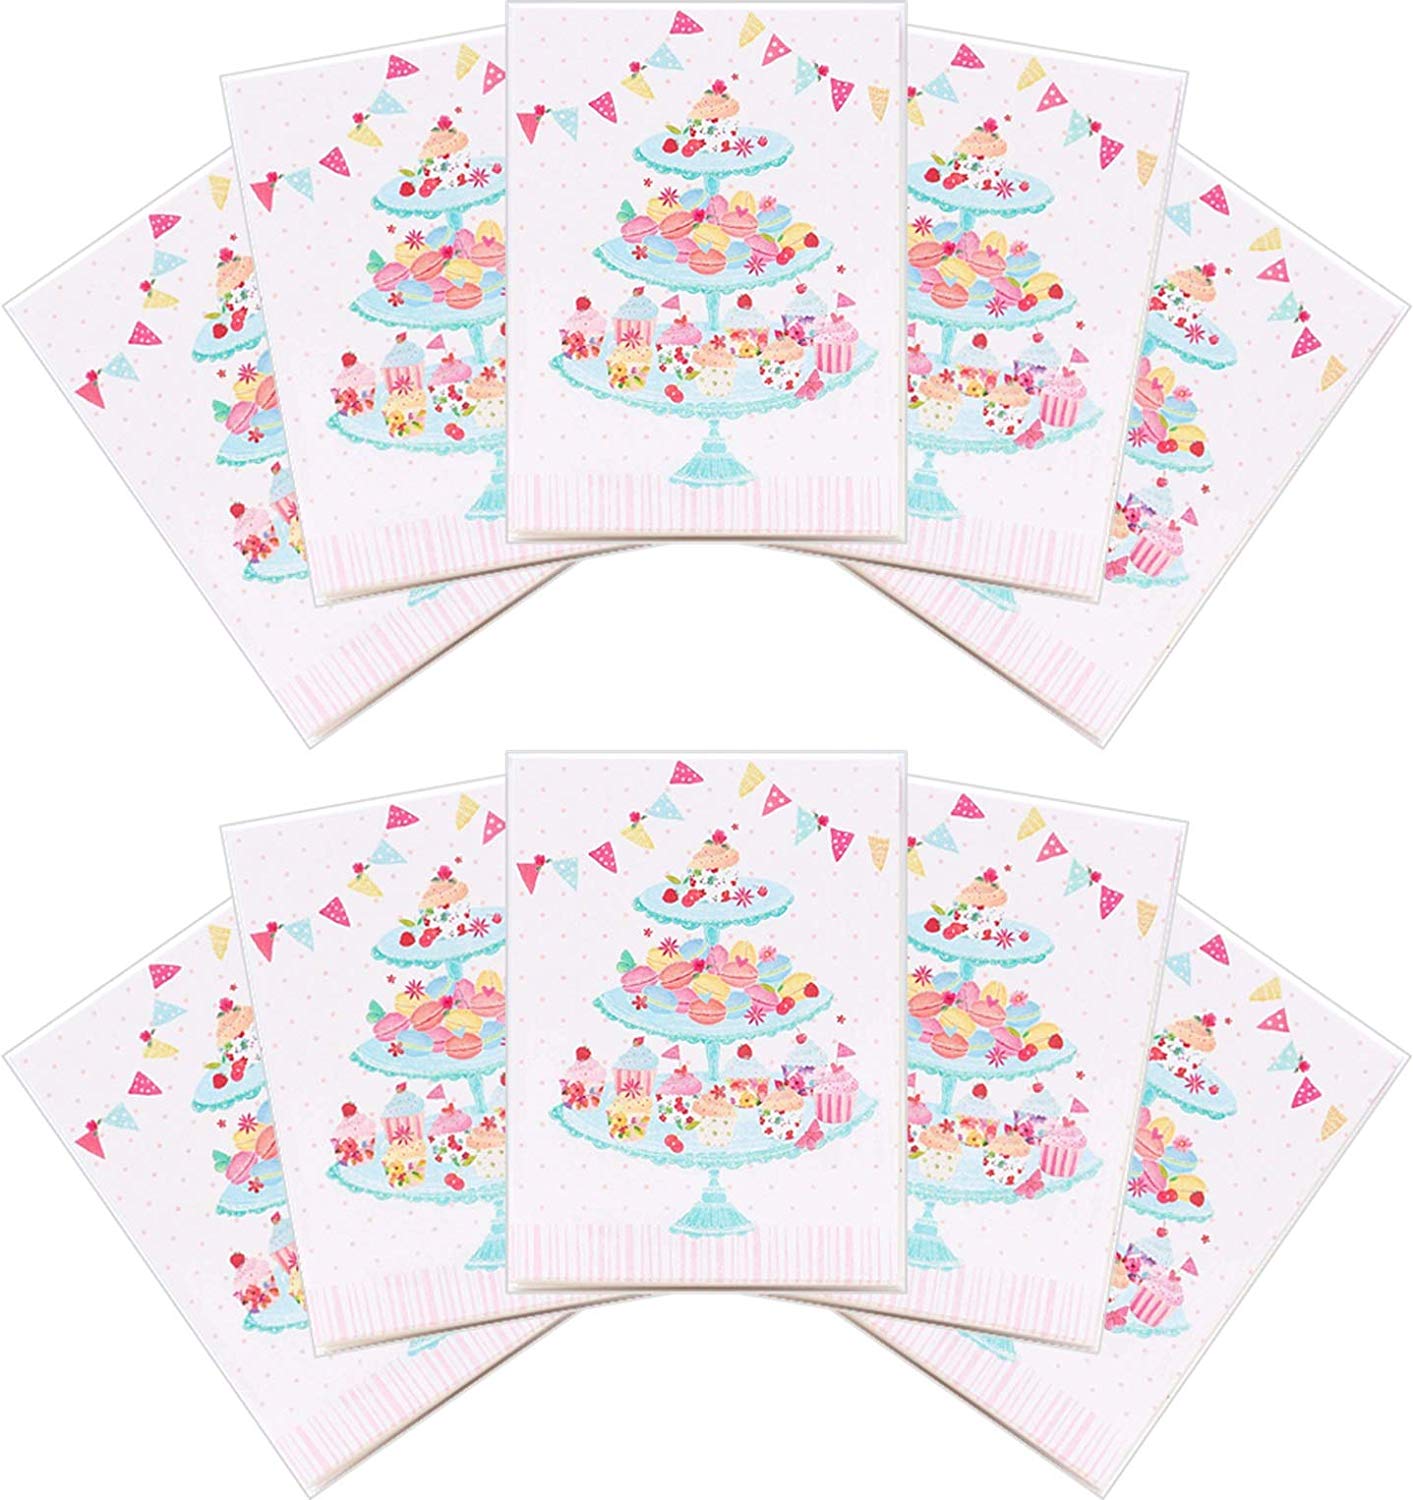 Multipack of 10 Greeting Cards Blank Inside for All Occasions 